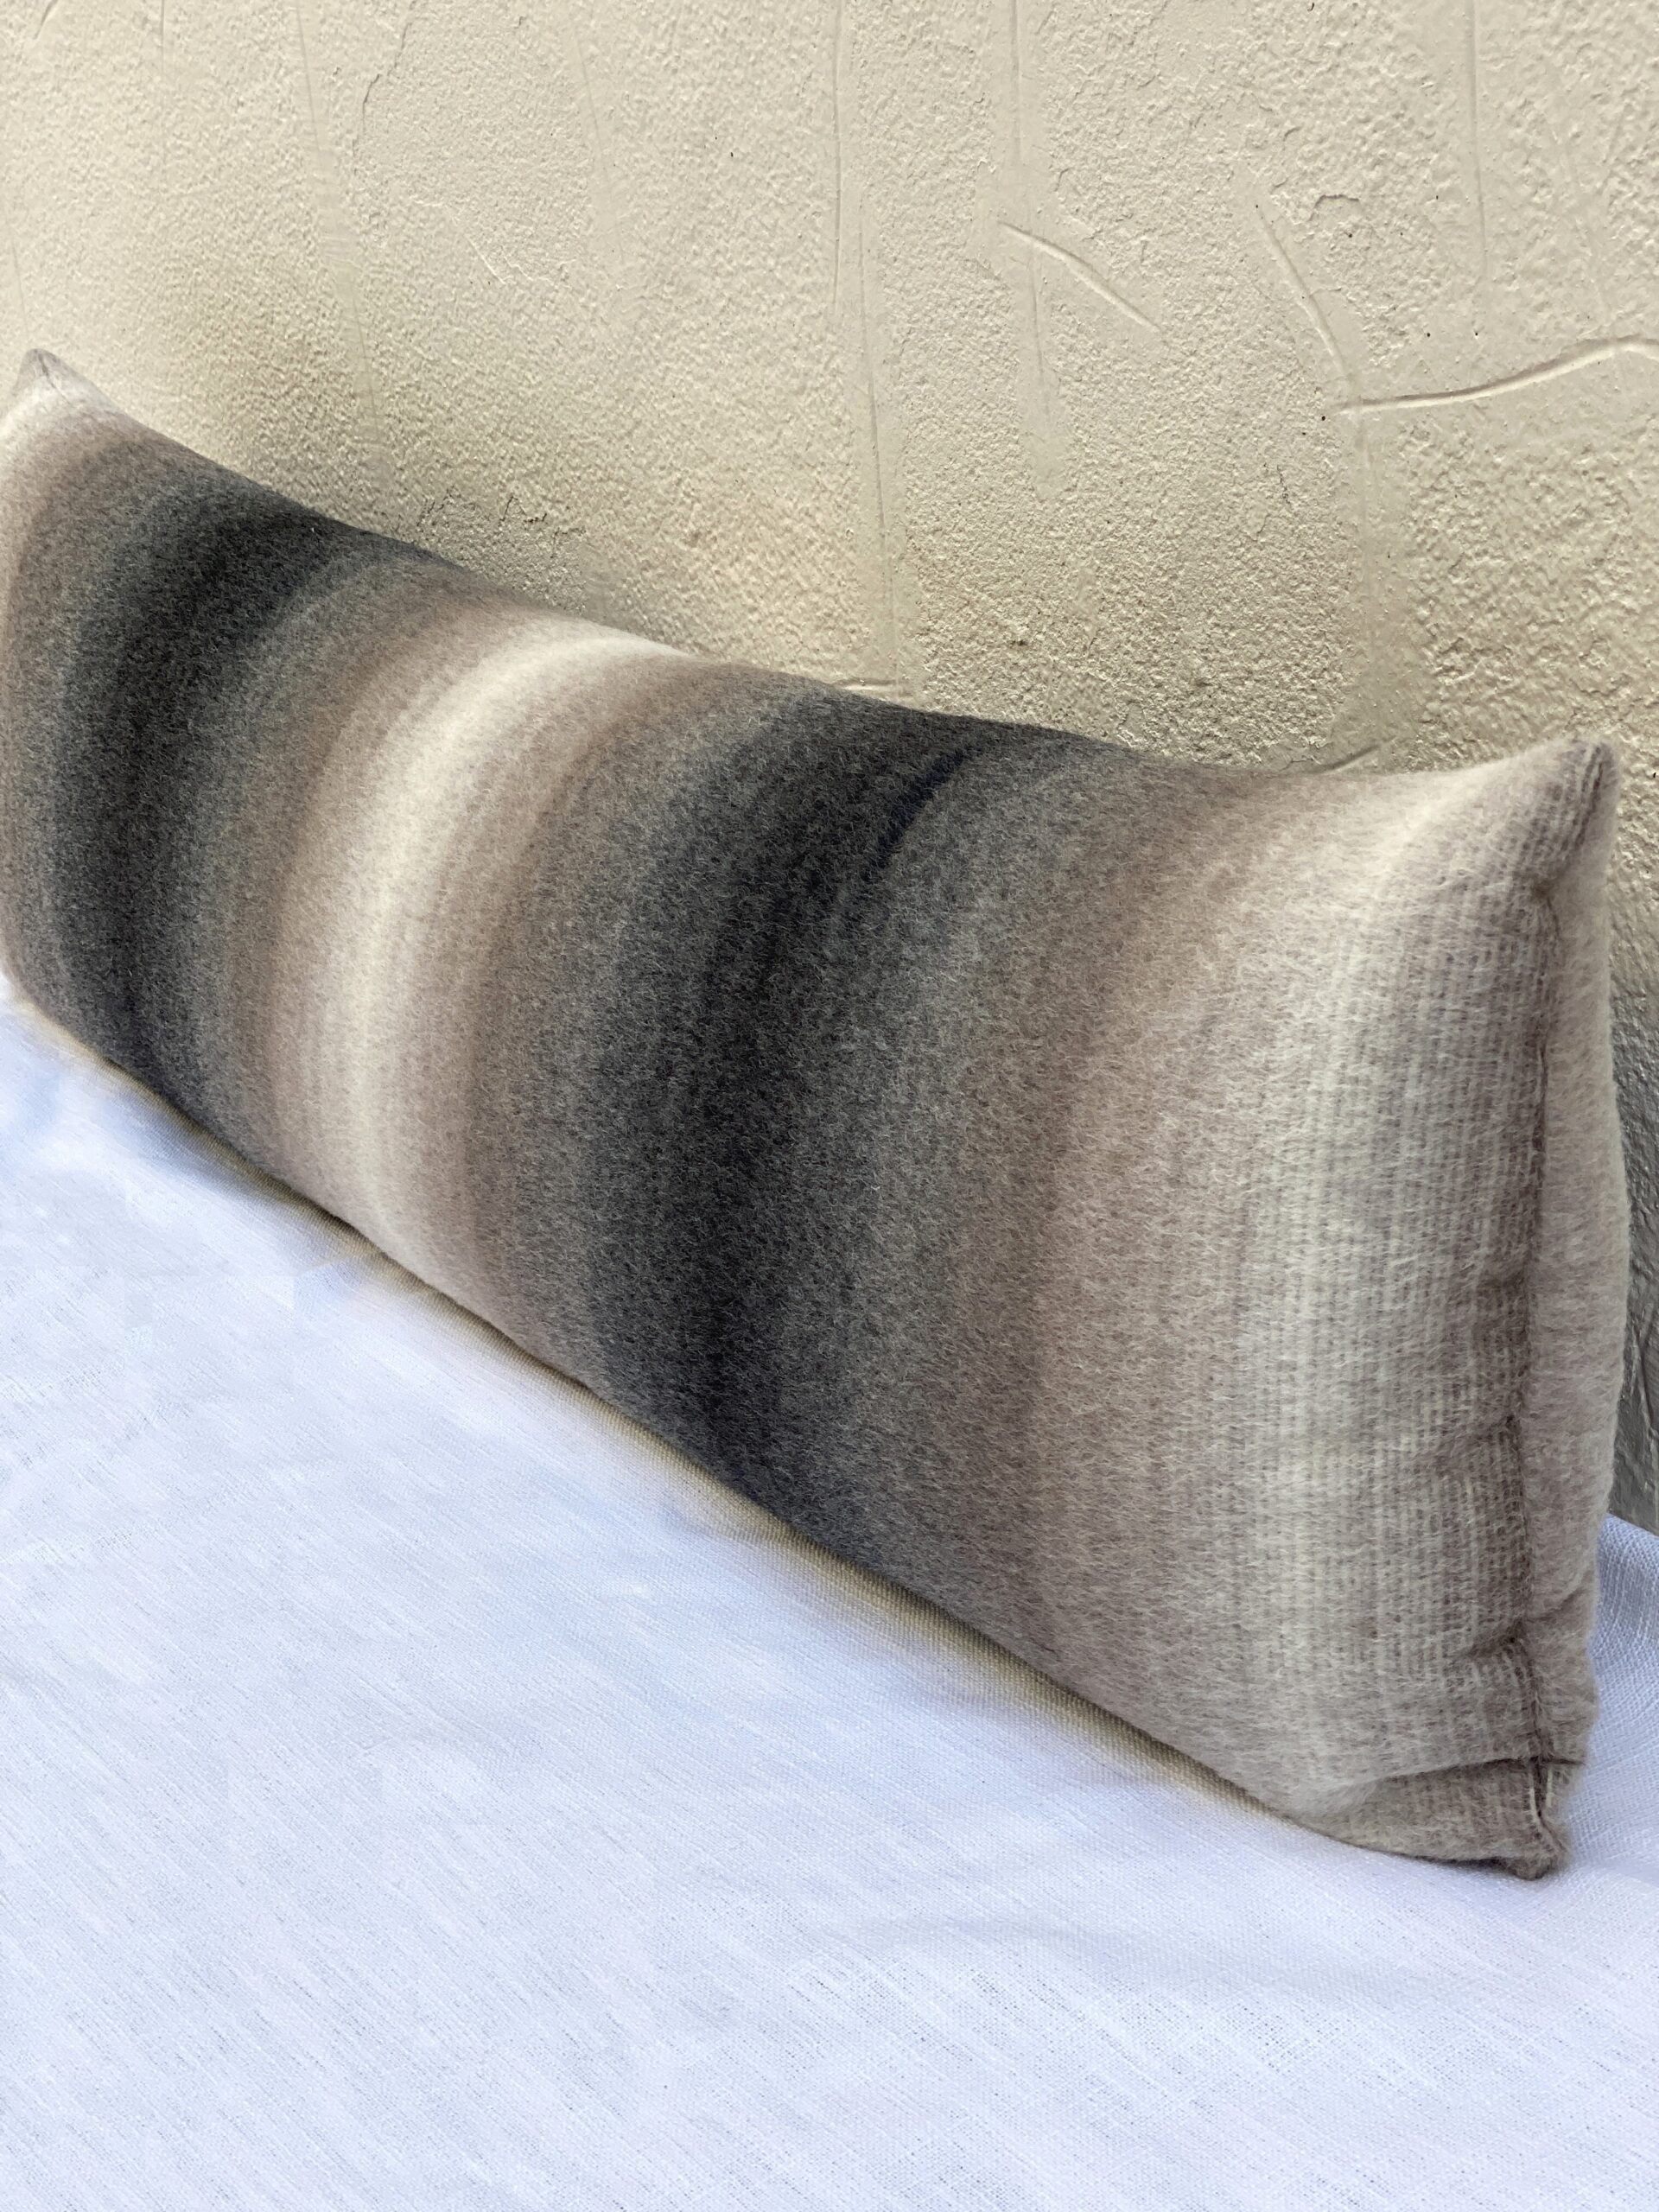 Donghia Northern Stripes Pillows